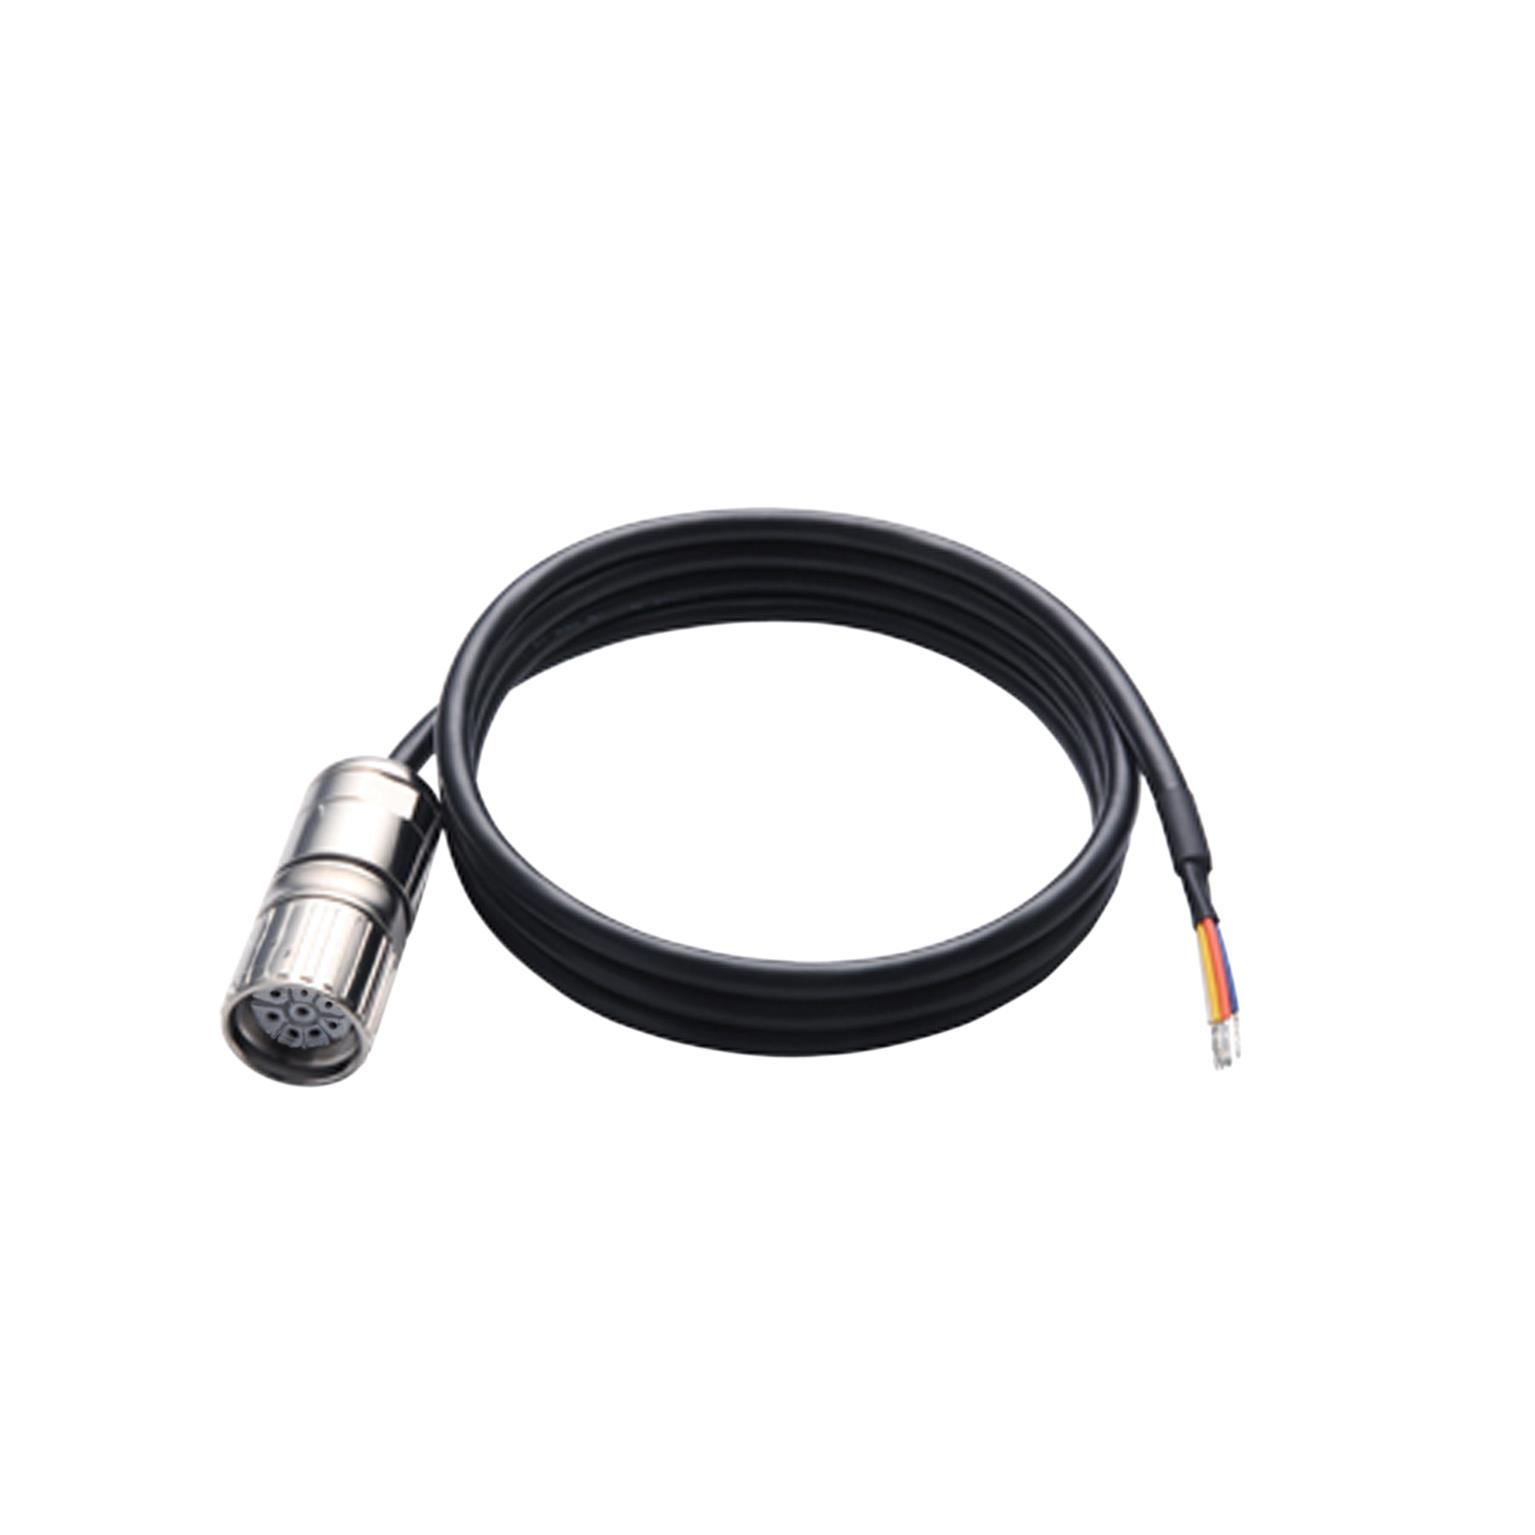 【VW3M5502R200】BMP POWER CABLE, 14 AWG, ONE END